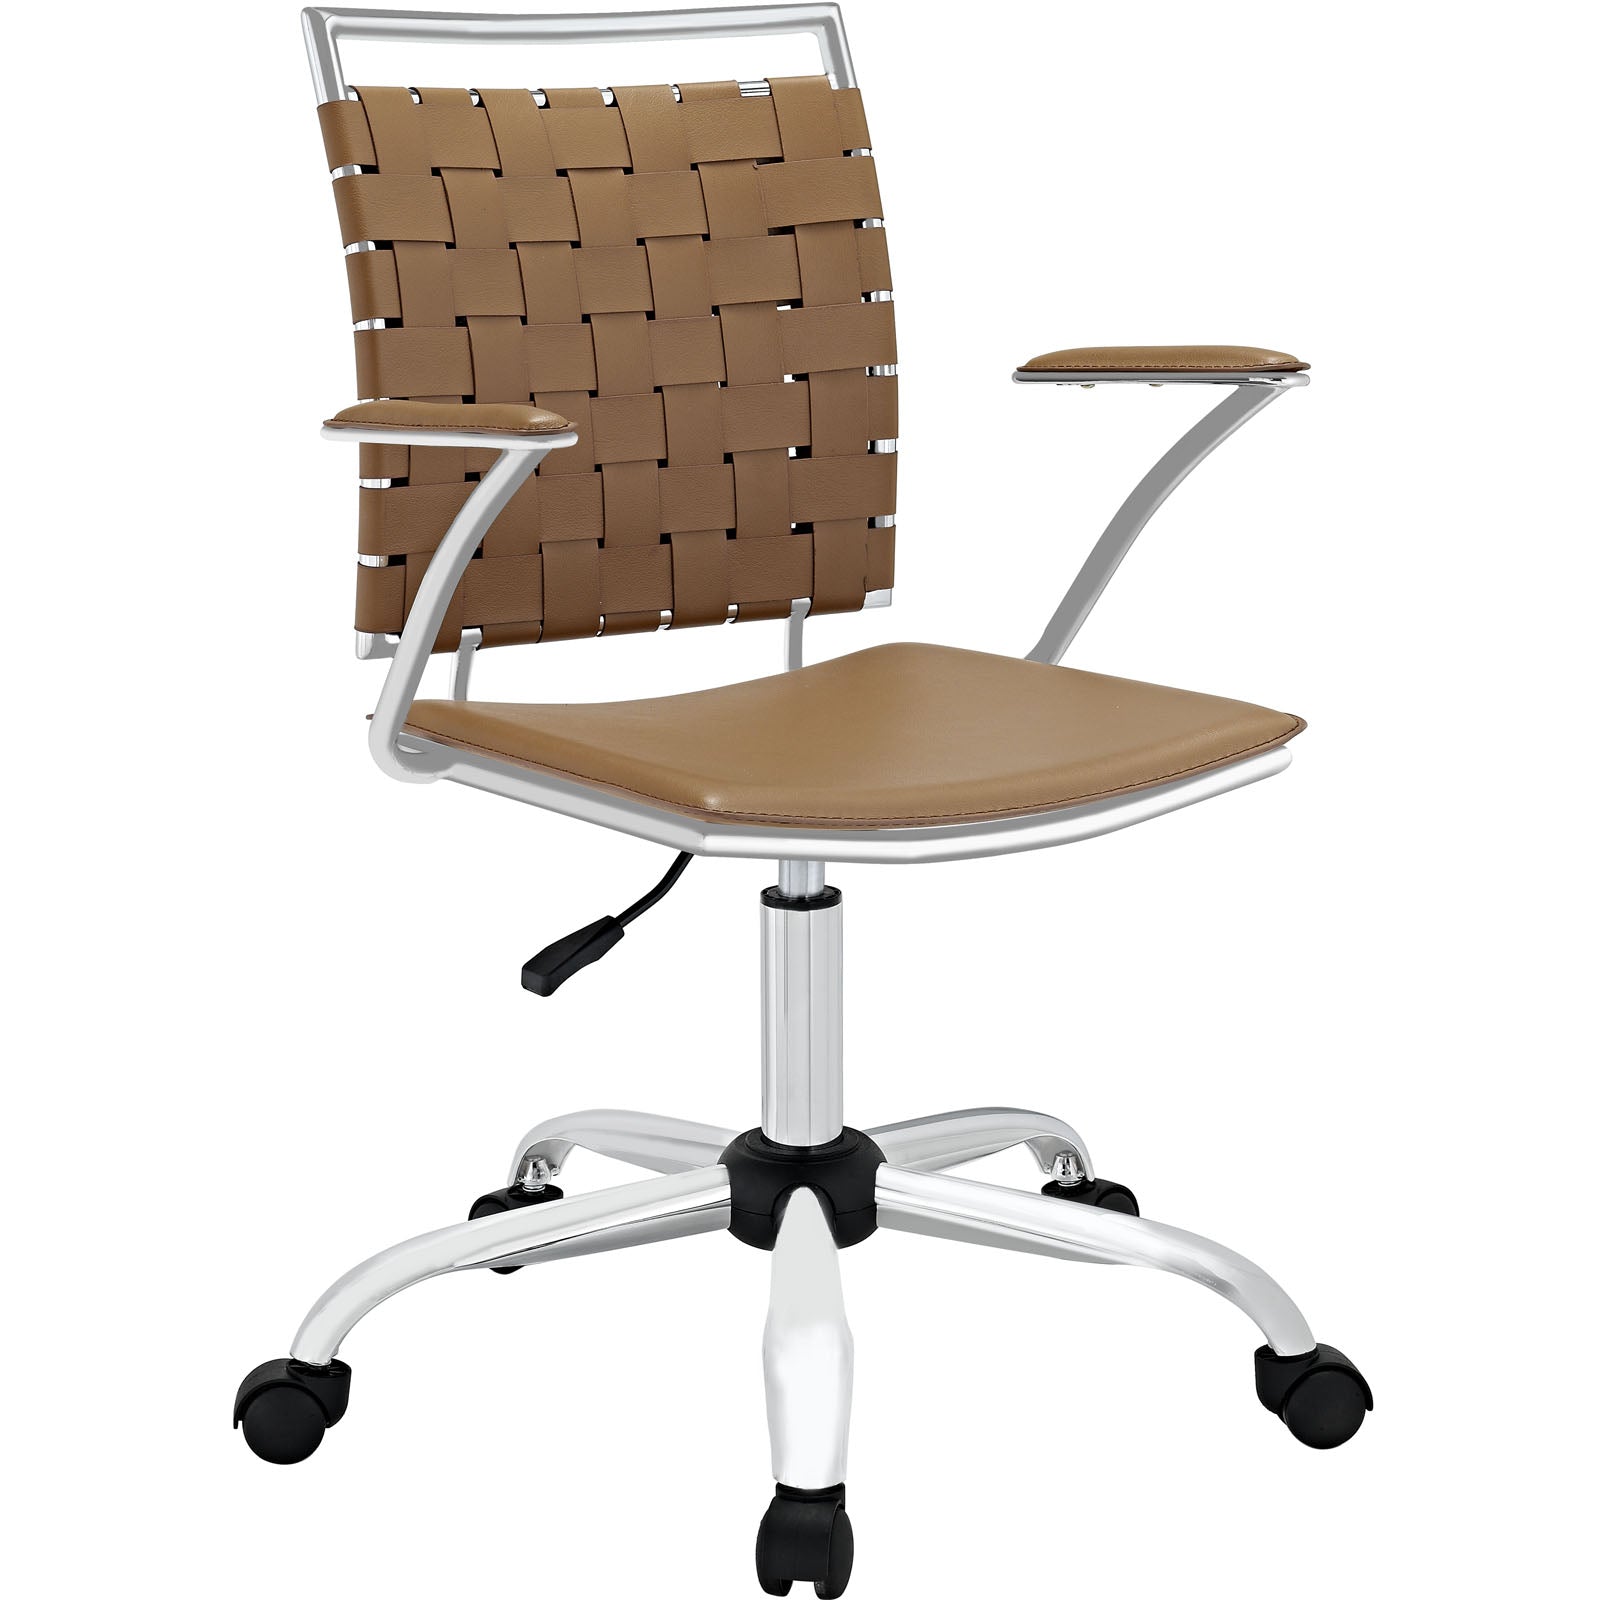 Fuse Office Chair with Adjustable height Facility | BUILDMyplace